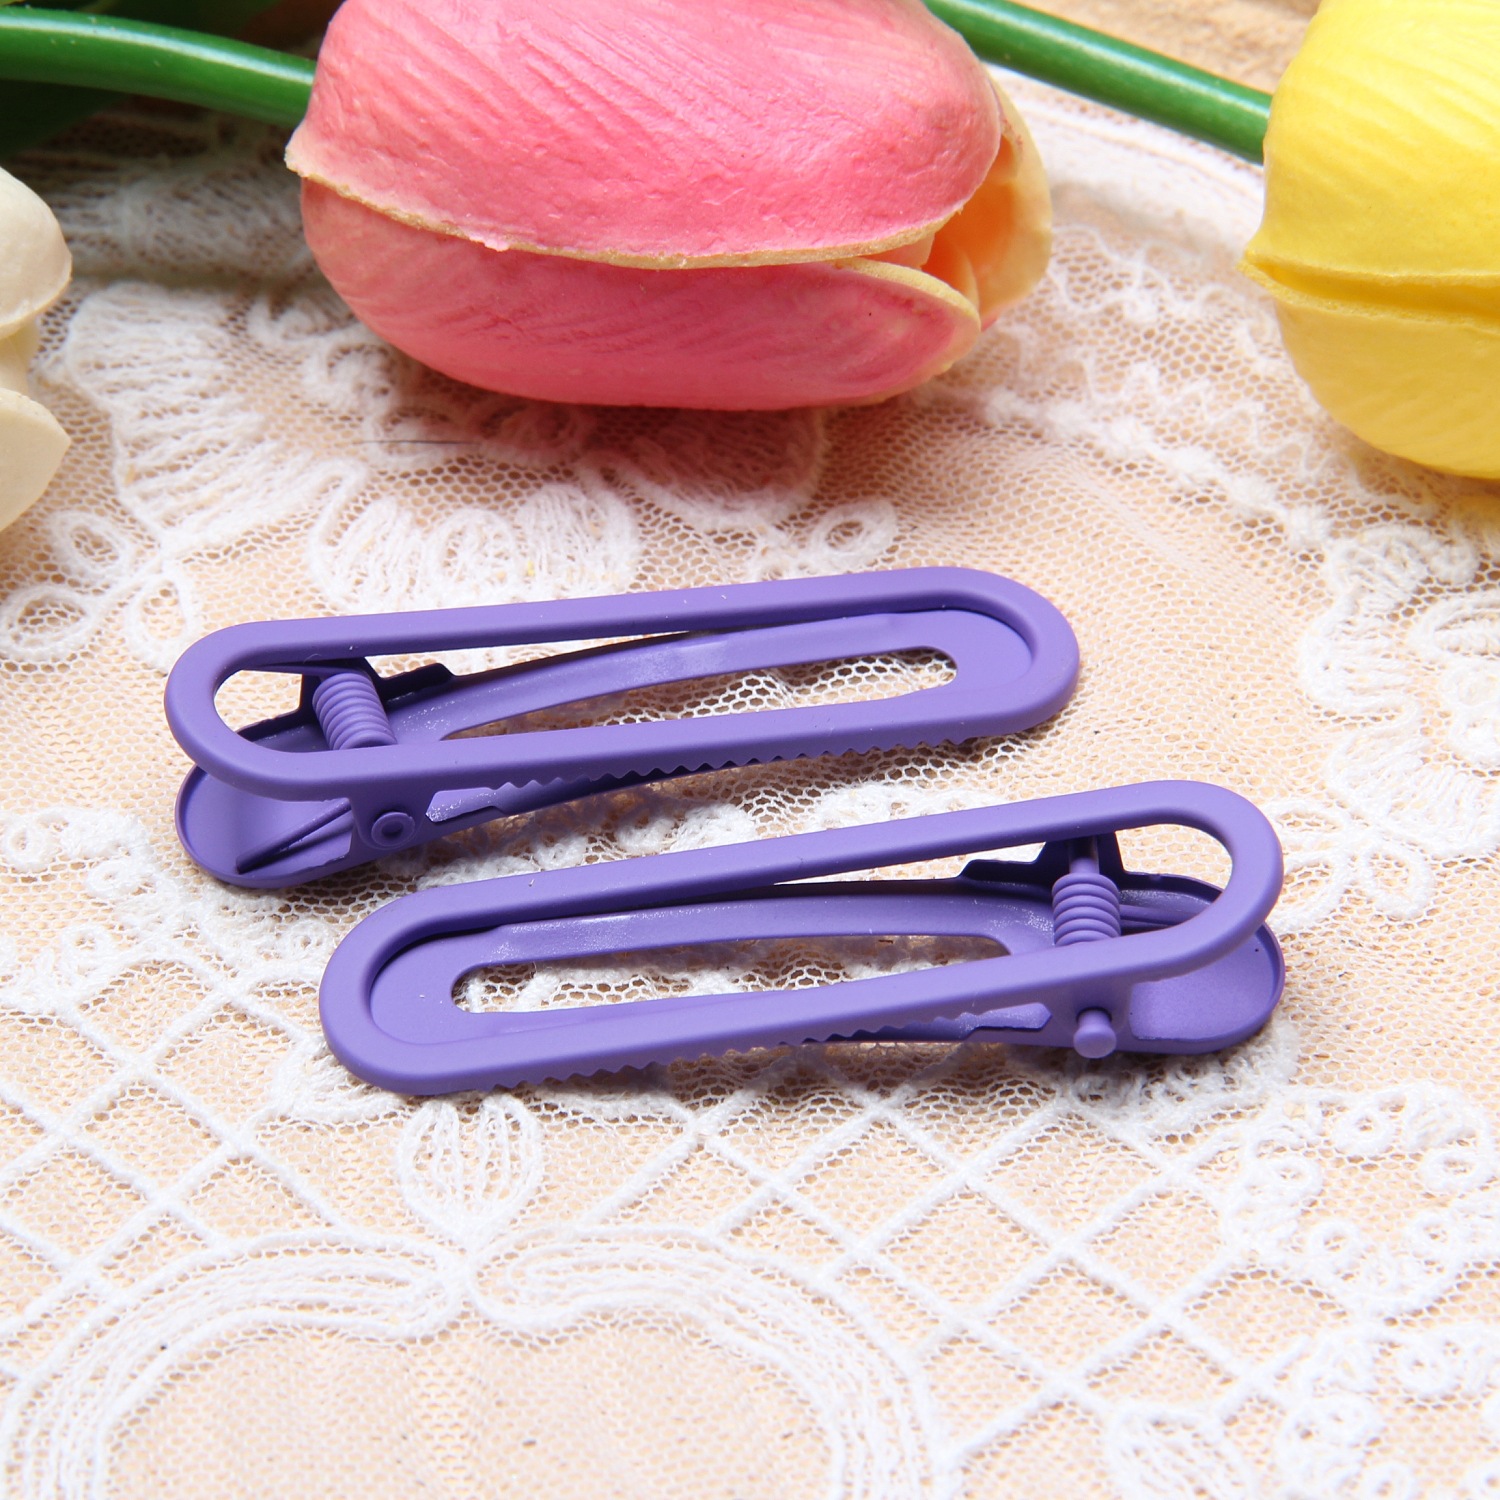 6*1.8cm candy color cream glue DIY material bb hairpin